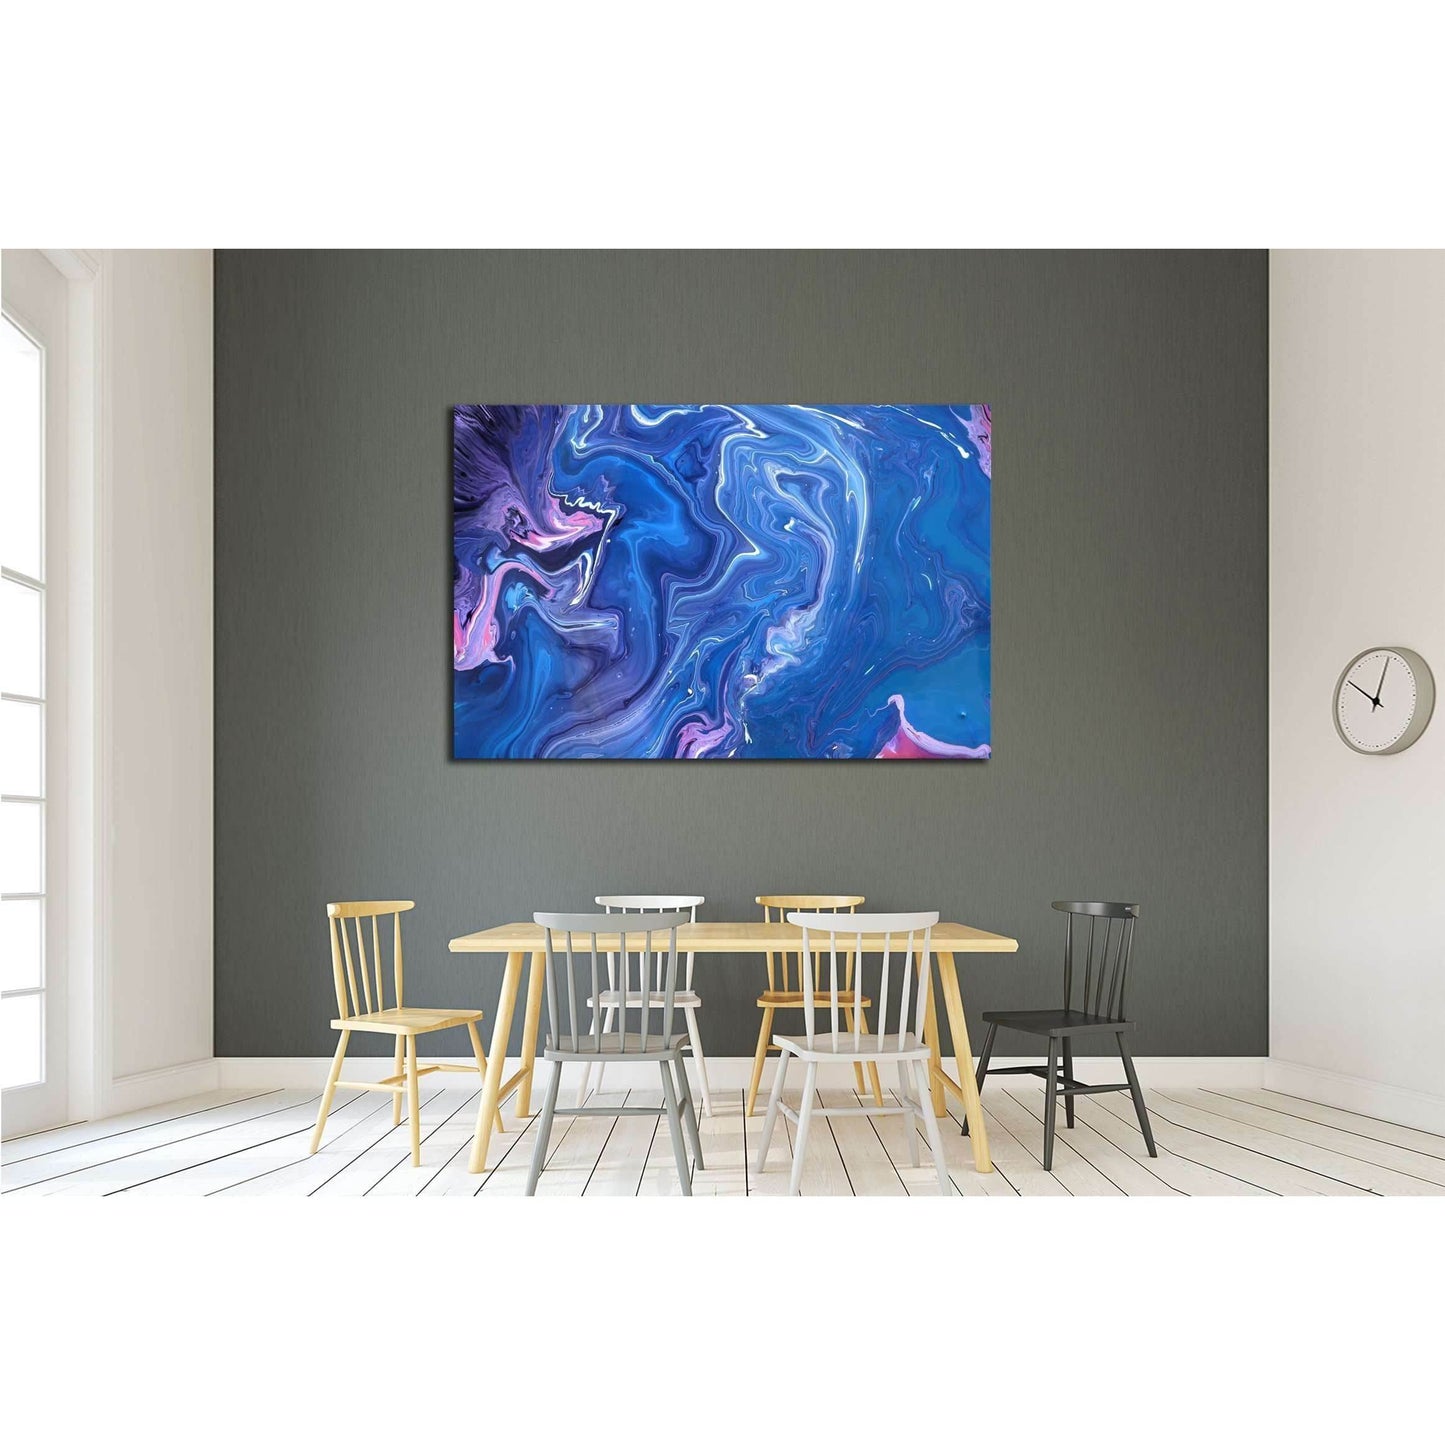 Blue Marble Canvas Print for Office DecorDecorate your walls with a stunning Blue Marble Canvas Art Print from the world's largest art gallery. Choose from thousands of Marble artworks with various sizing options. Choose your perfect art print to complete